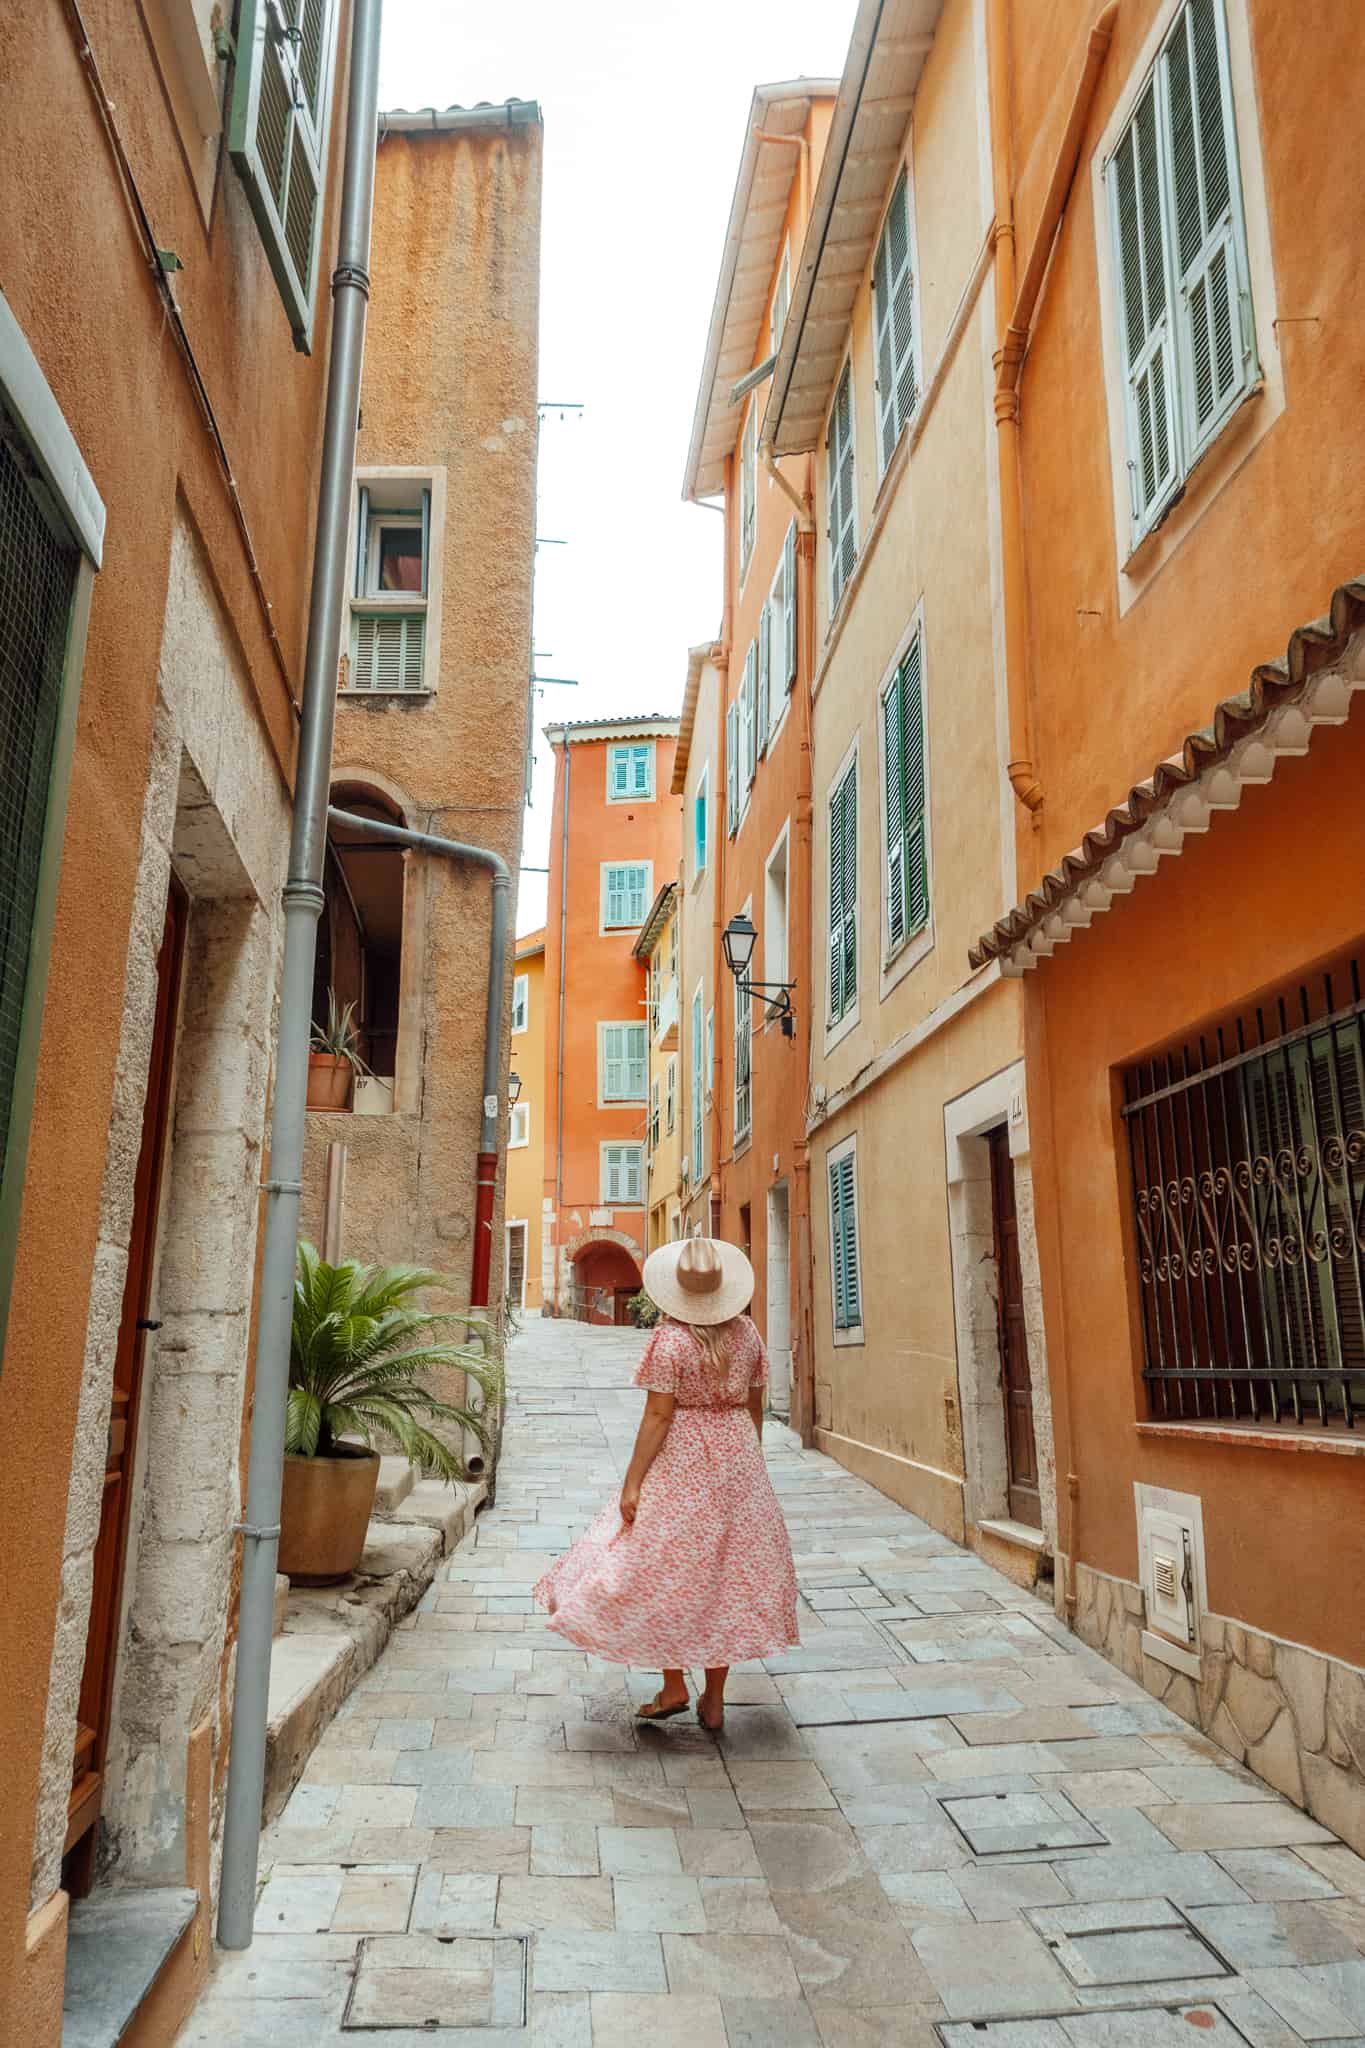 Colorful streets of Villefranche-sur-Mer